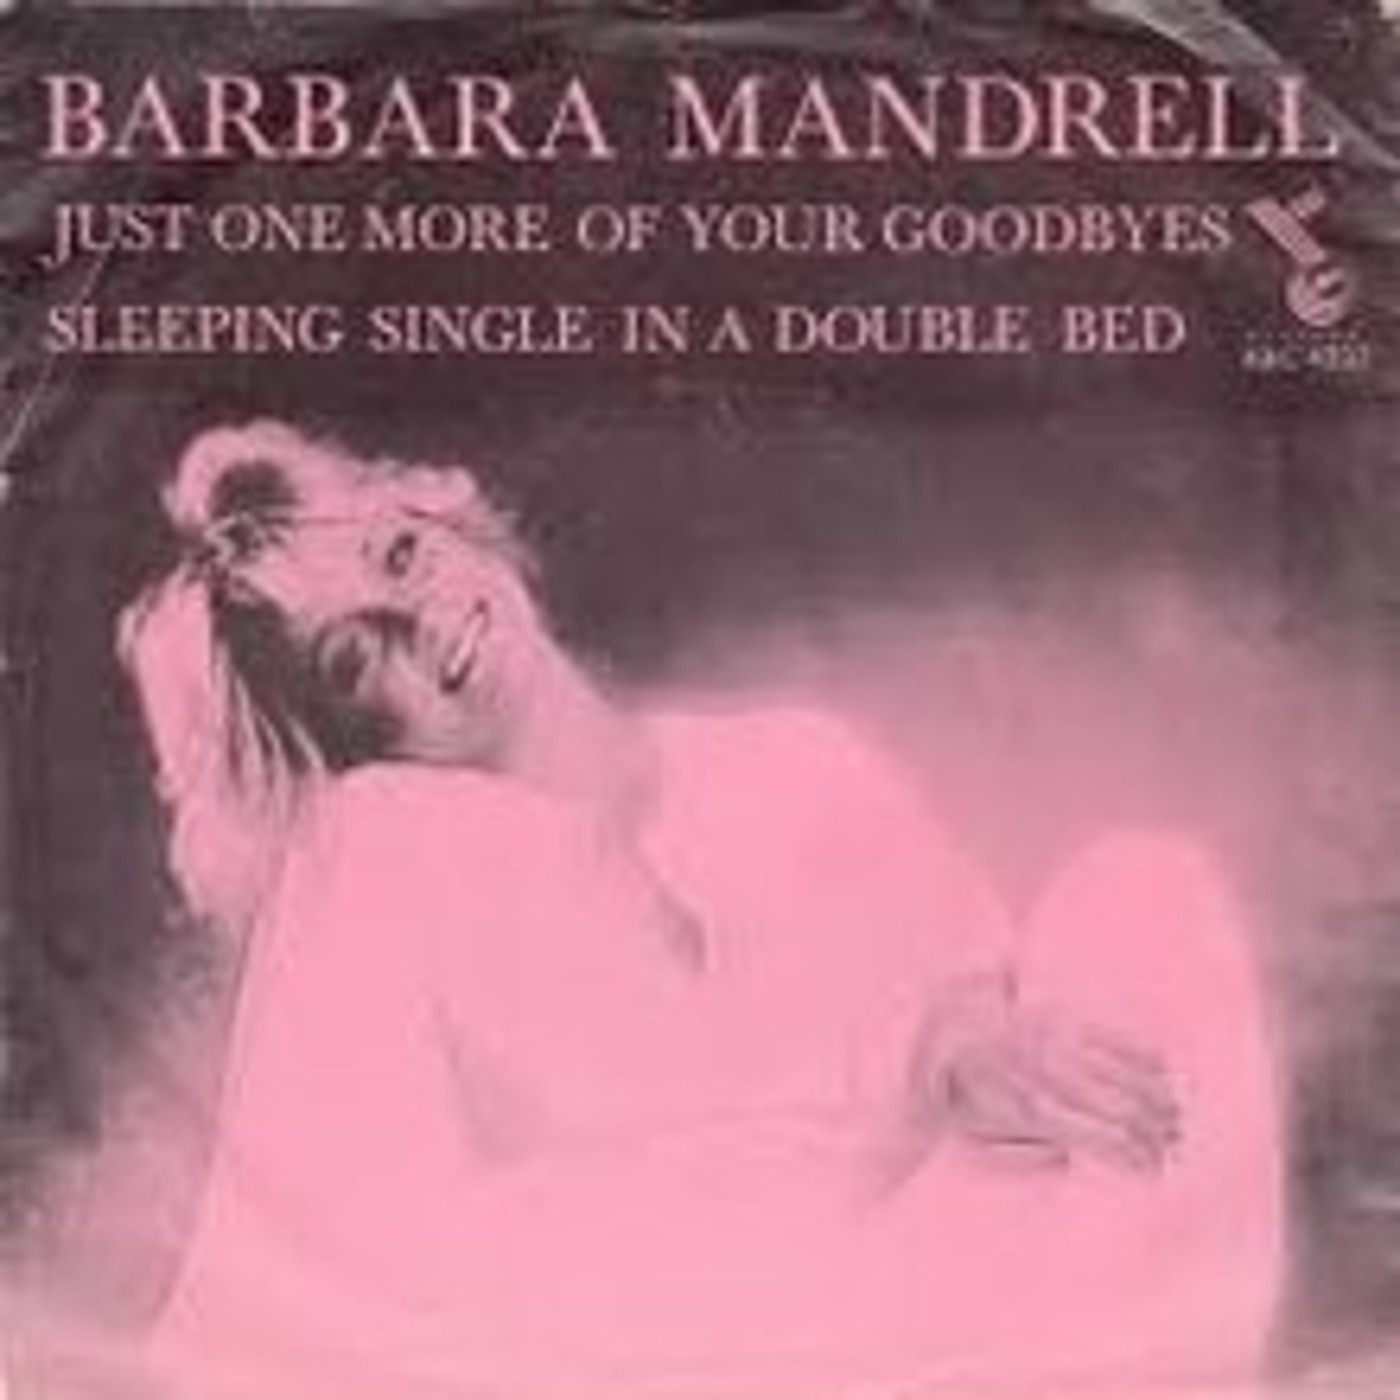 Sleeping Single In A Double Bed by Barbara Mandrell